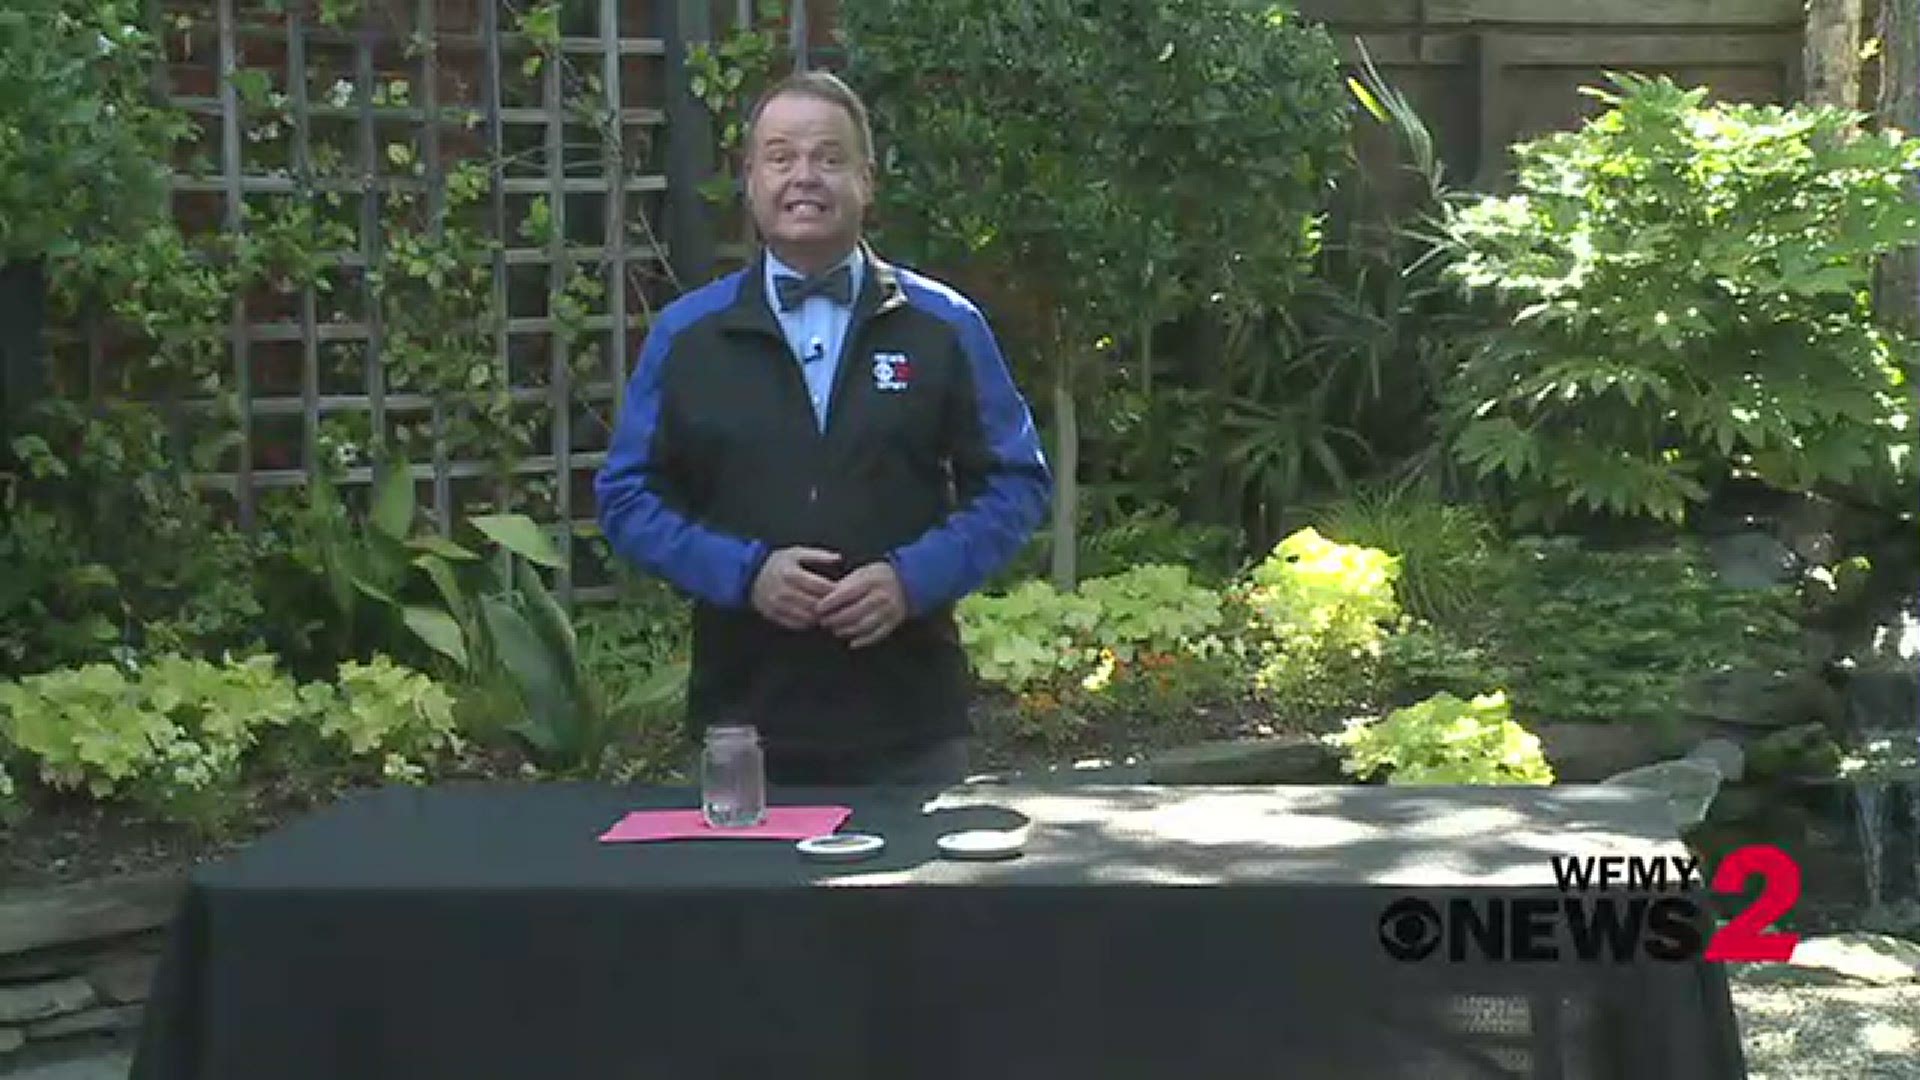 Try the water from thin air experiment with the News 2 Science Geeks.